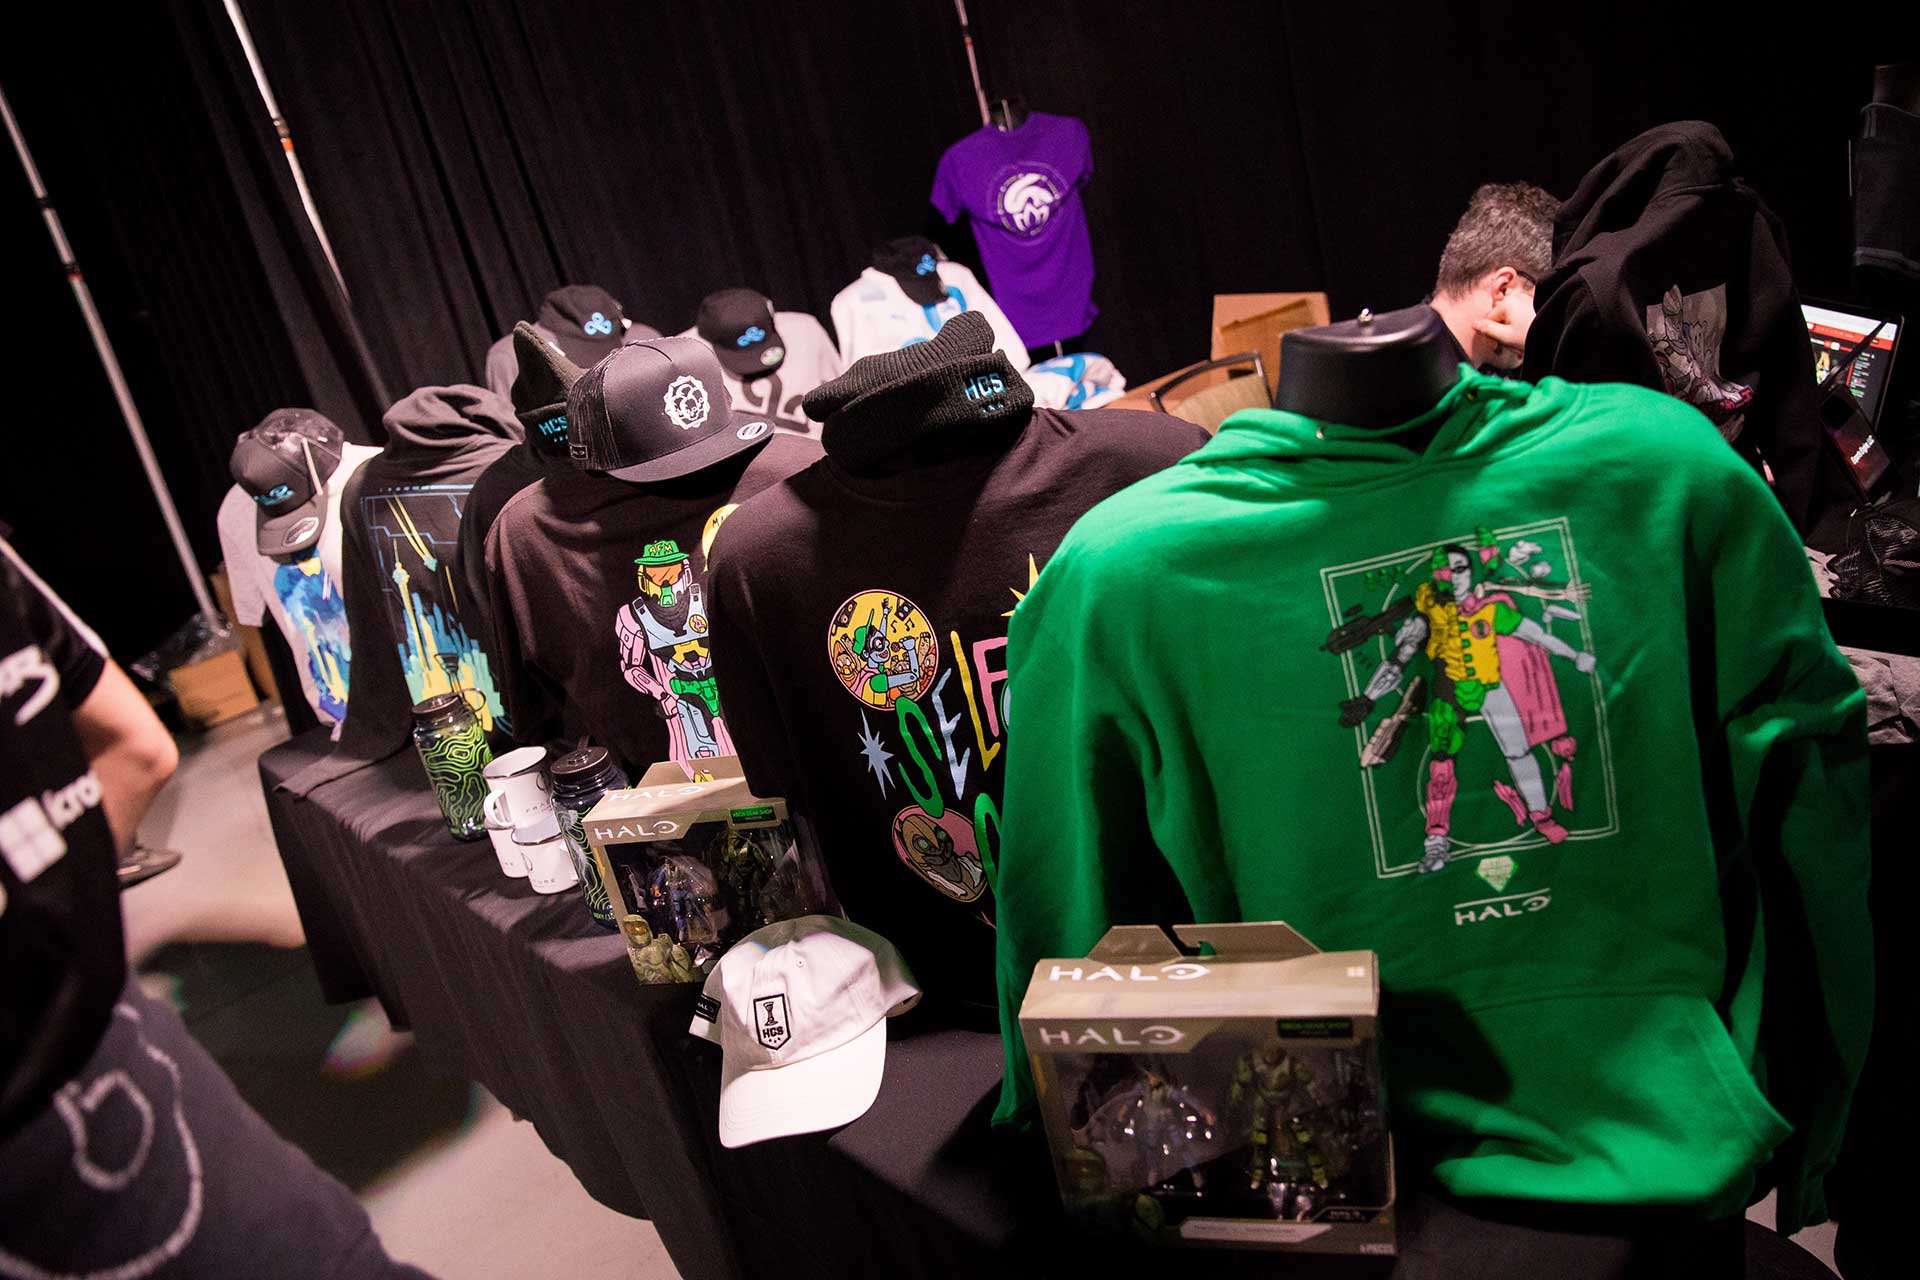 The Halo Gear booth from the 2022 Halo World Championship. 